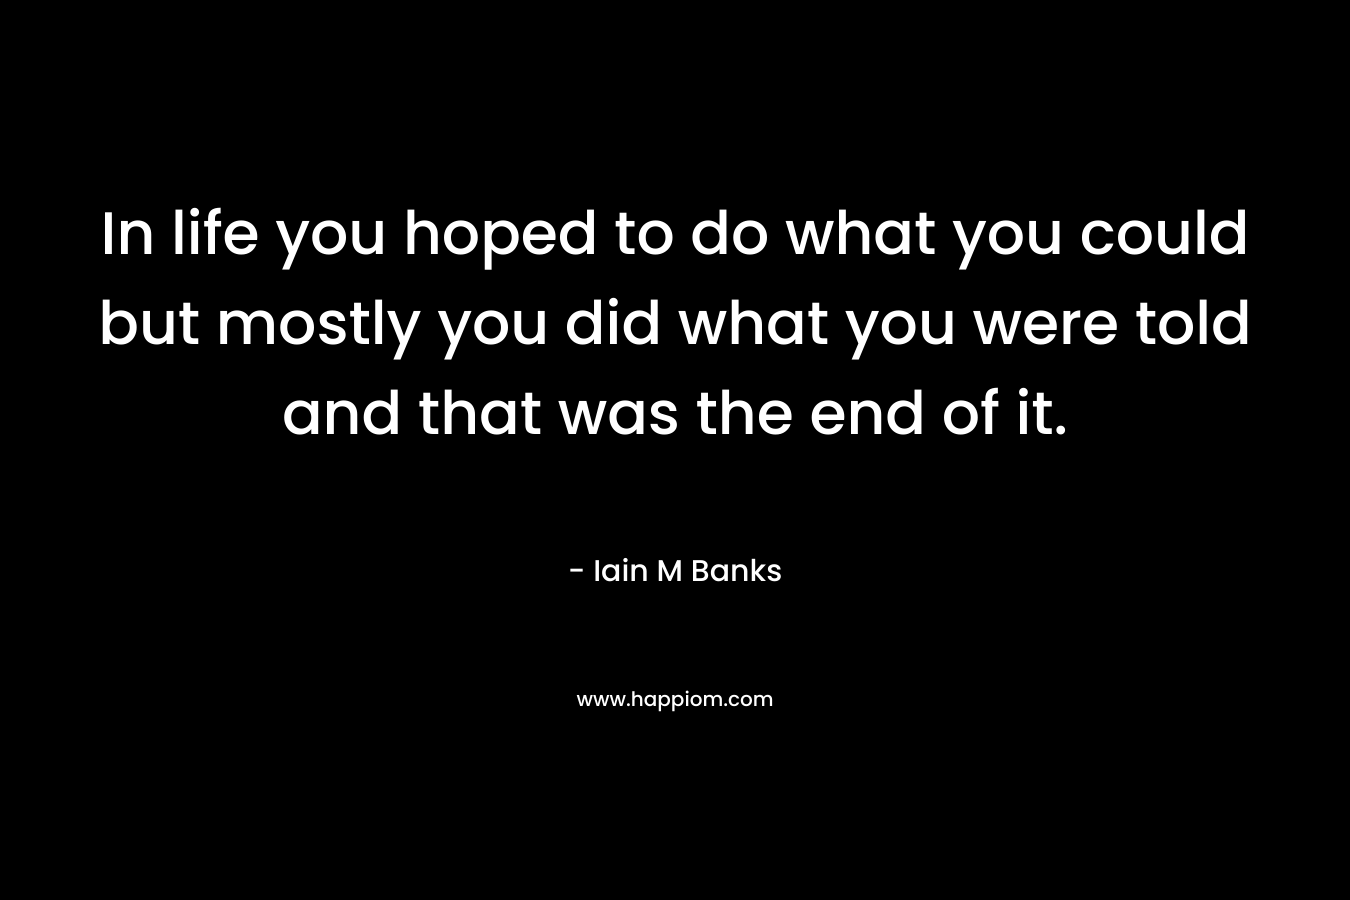 In life you hoped to do what you could but mostly you did what you were told and that was the end of it. – Iain M Banks